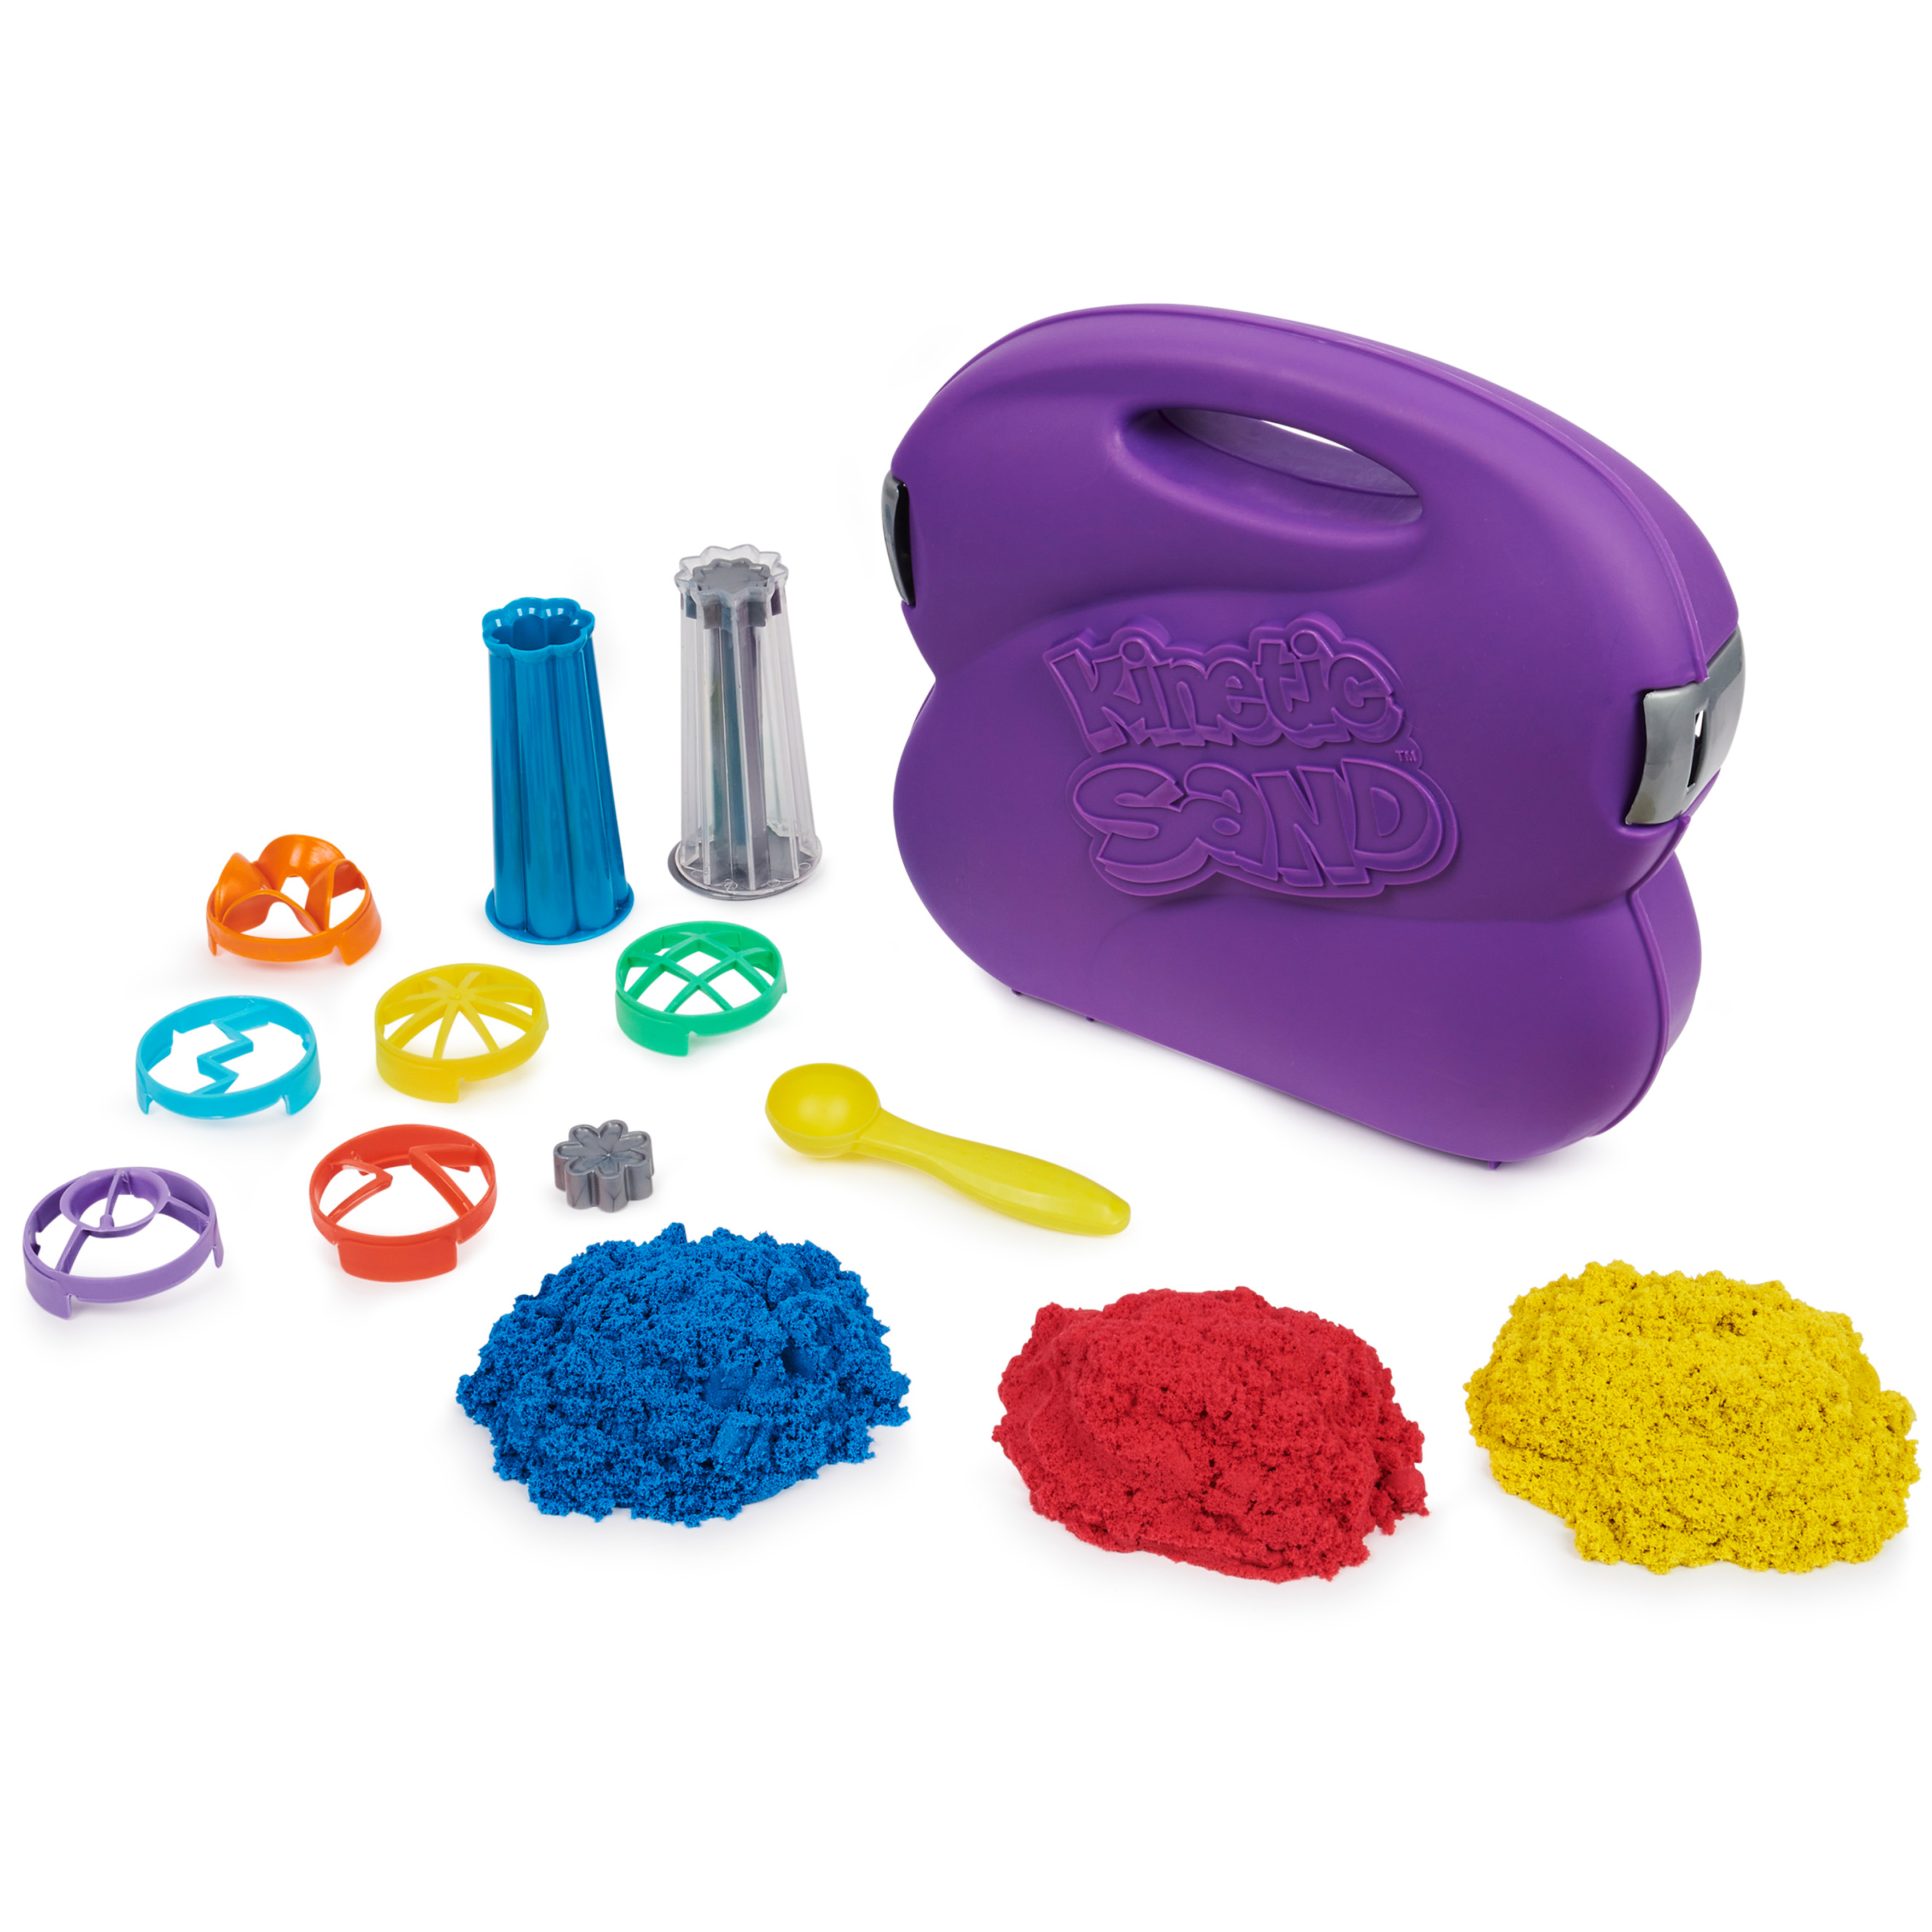 Kinetic Sand, Sandwhirlz Playset with 3 Colors of Kinetic Sand (2lbs) and Over 10 Tools, for Kids Aged 3 and up - image 3 of 10